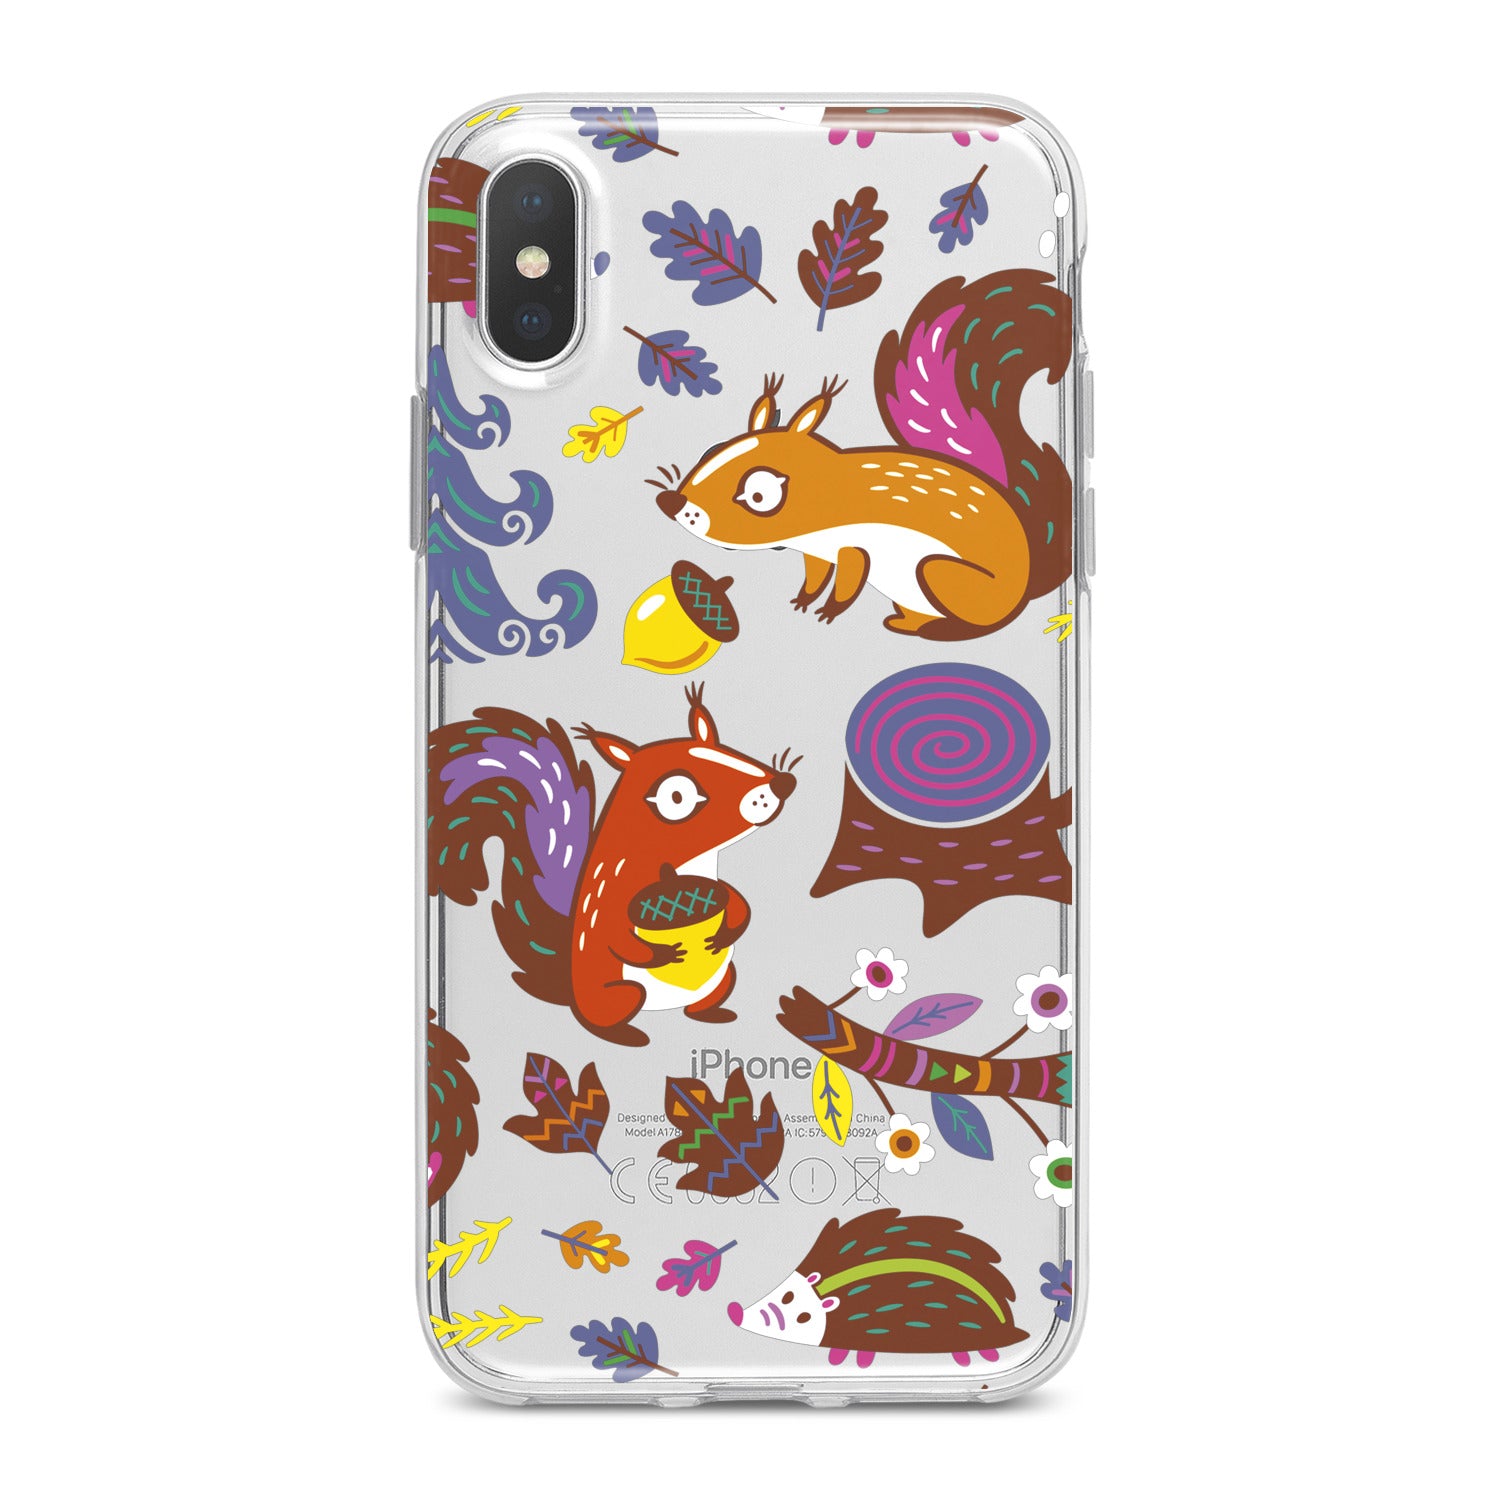 Lex Altern Squirrel Hedgehog Friends Phone Case for your iPhone & Android phone.